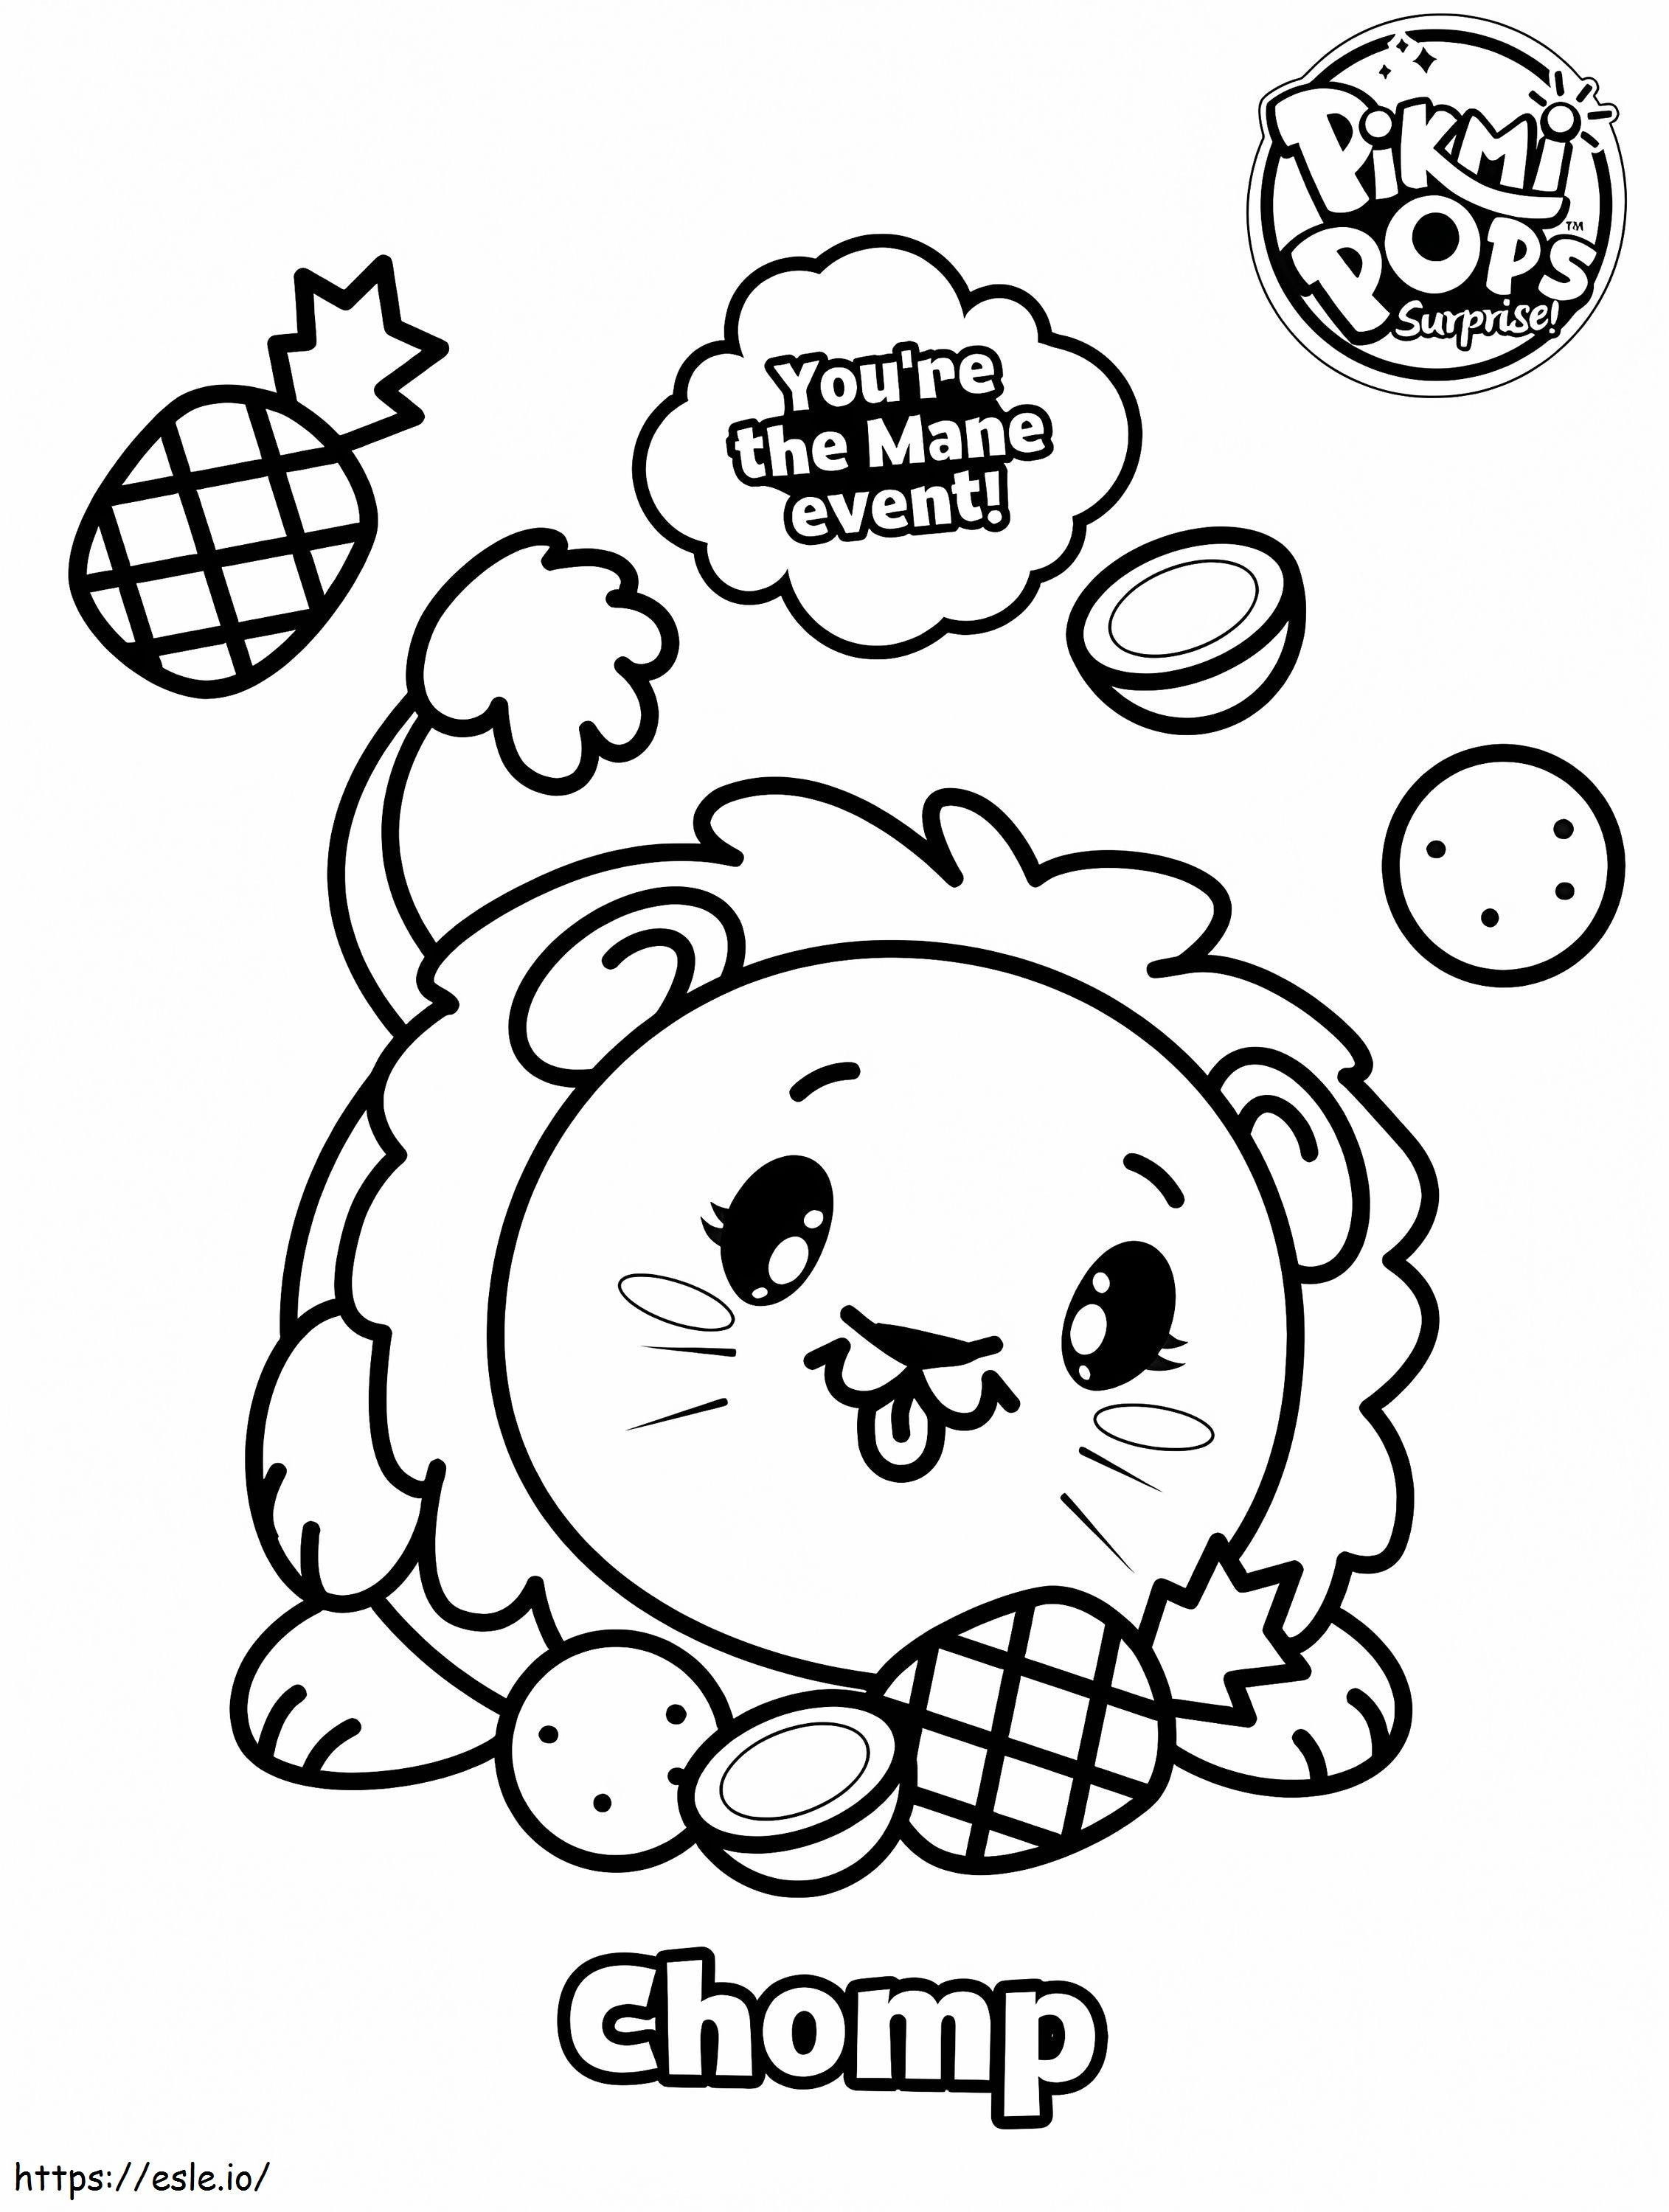 6C8Gzz7 Pikmi Pops Skittle coloring page